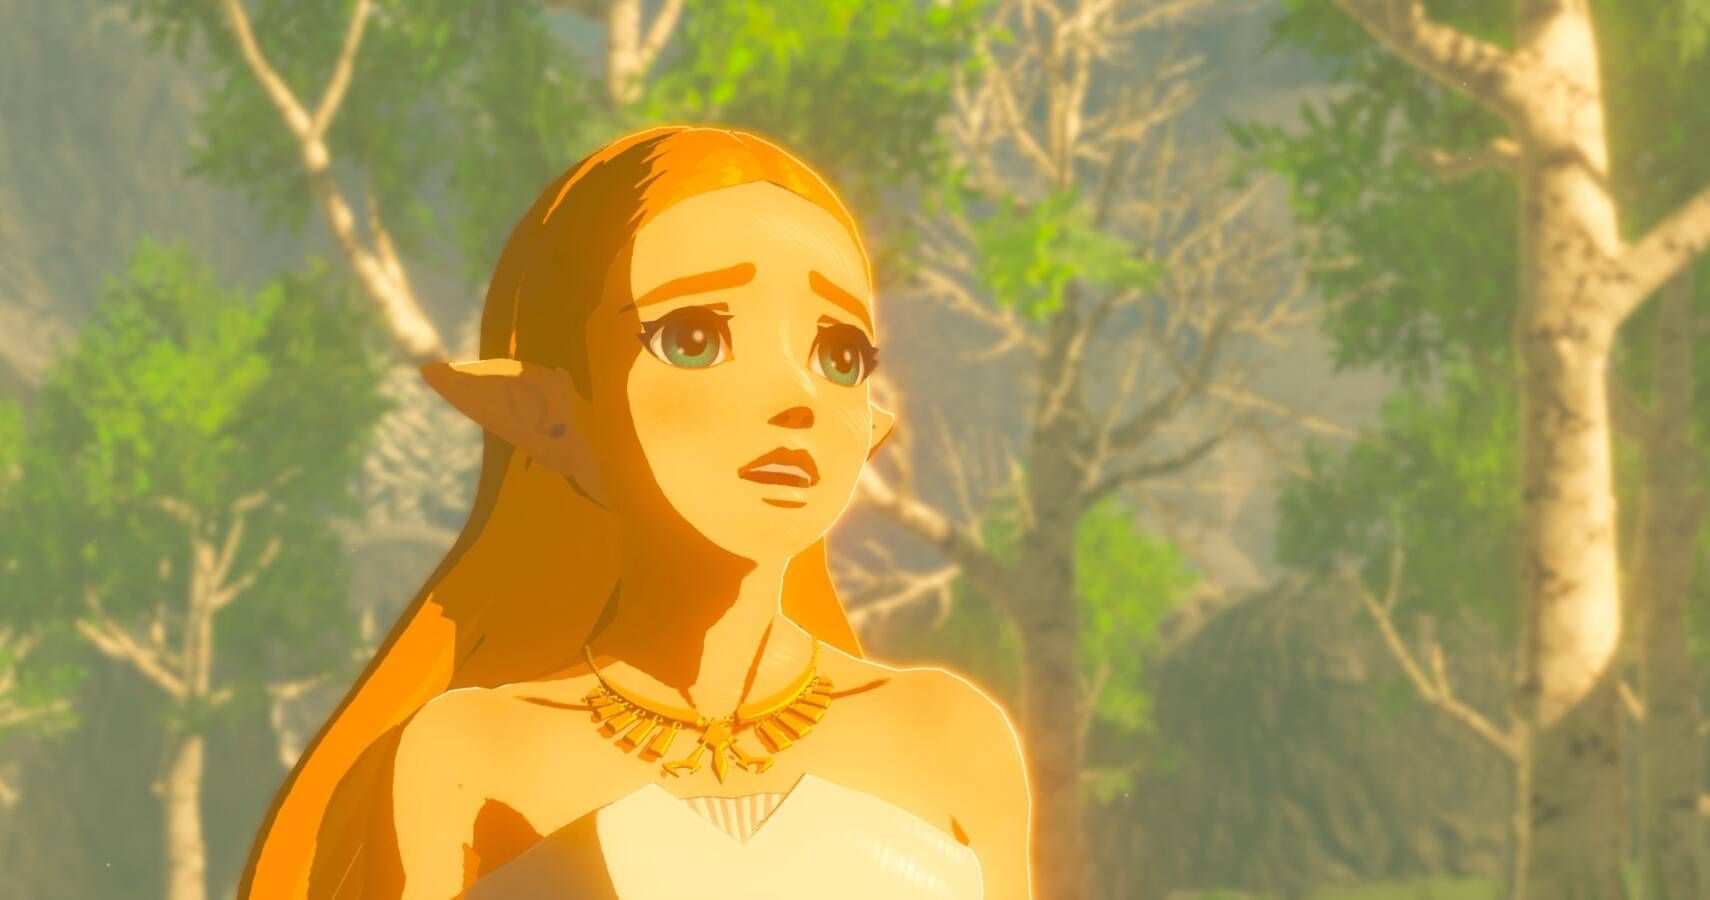 breath of the wild access memory pictures on camera